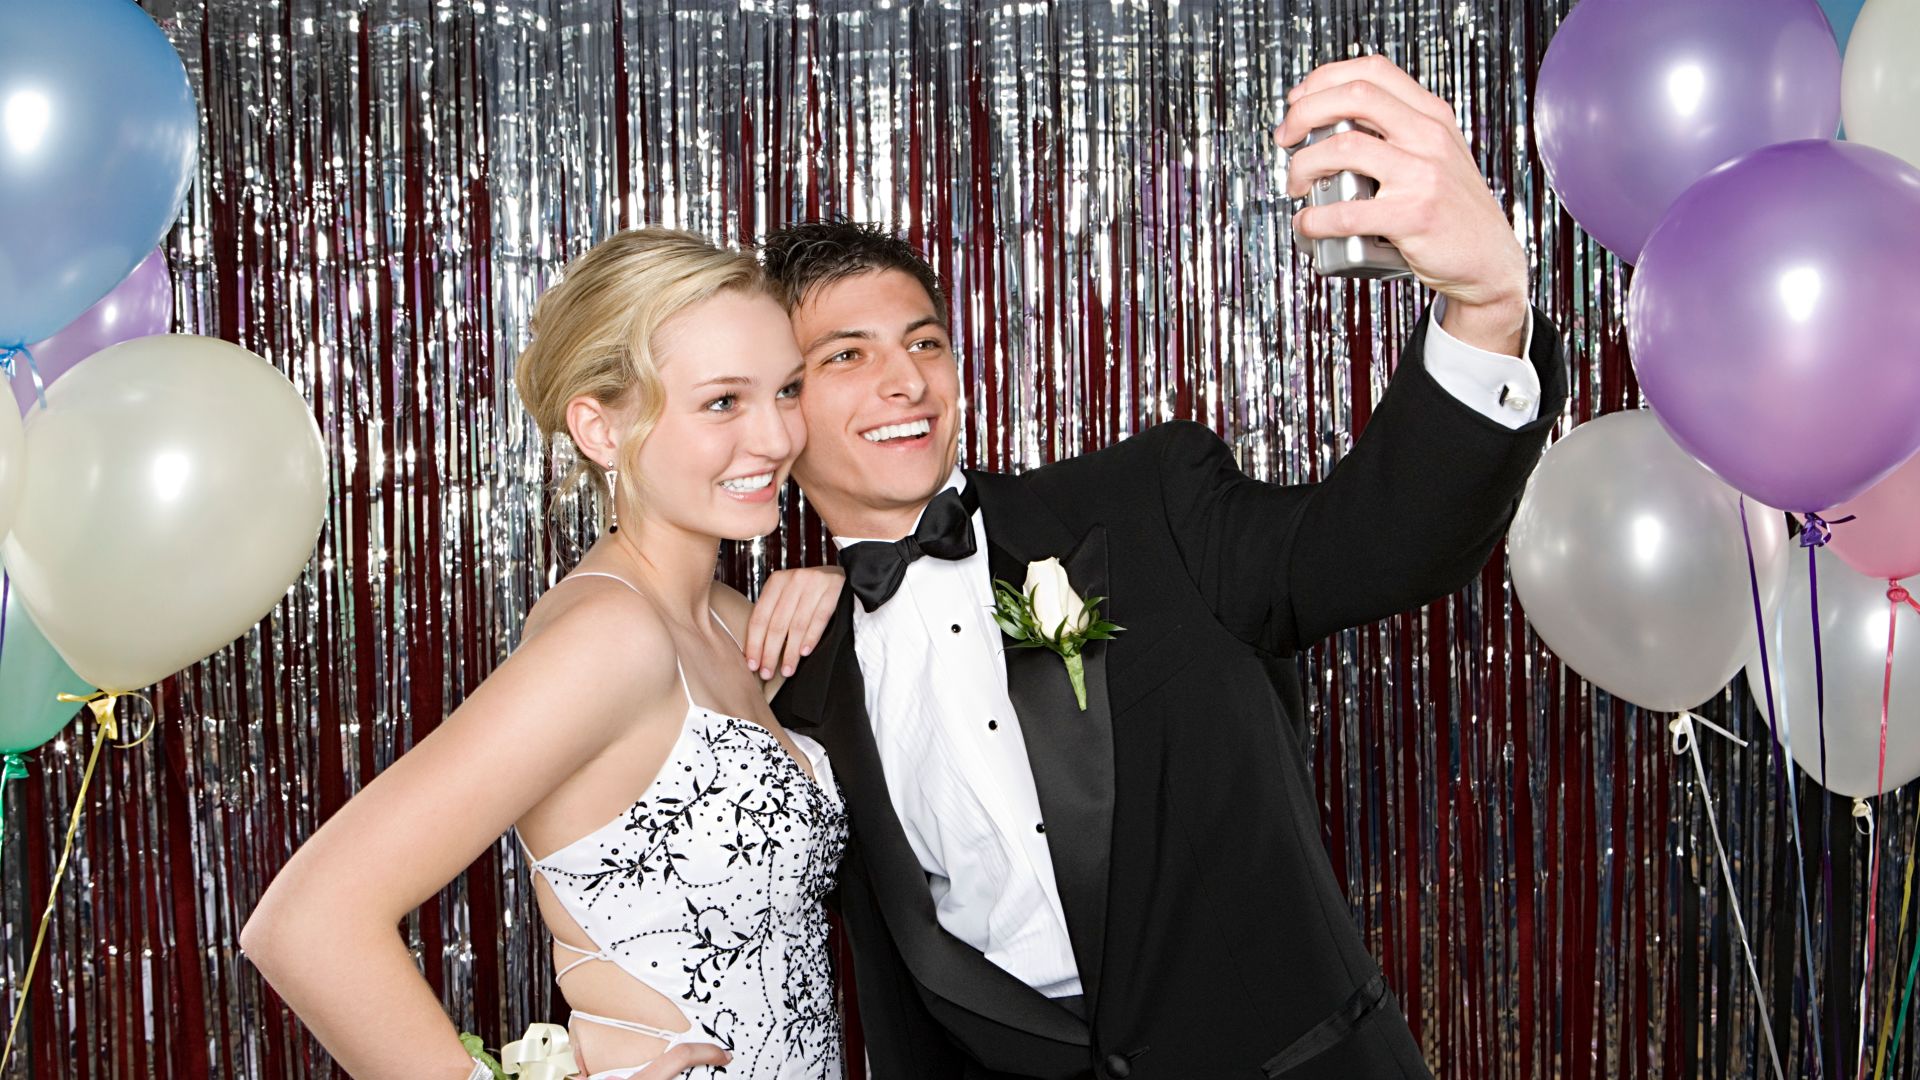 Couple Taking Selfie at Prom